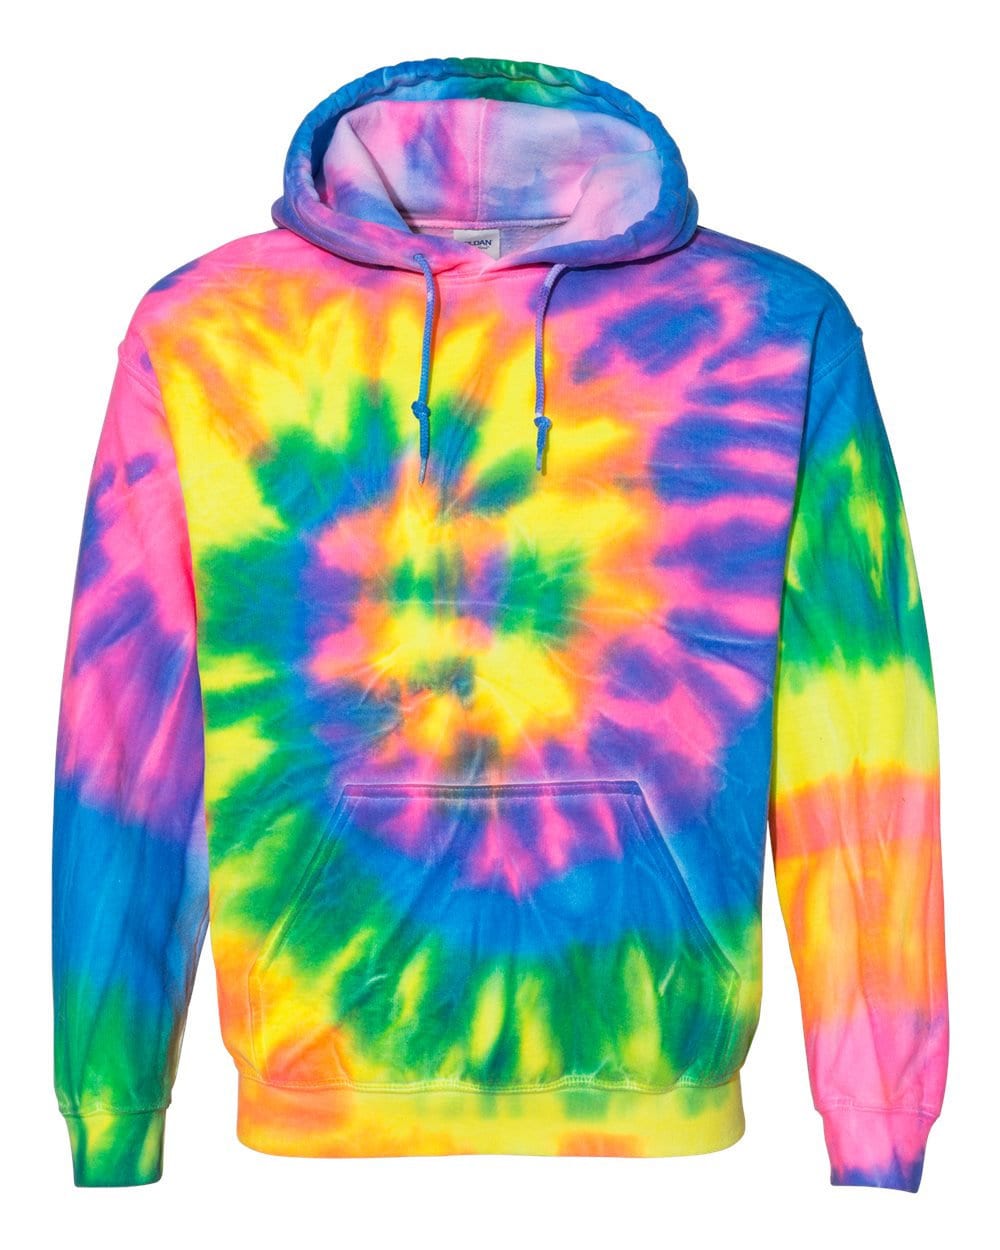 Custom Personalized Tie-Dye Hoodies Best Gift For All | Etsy